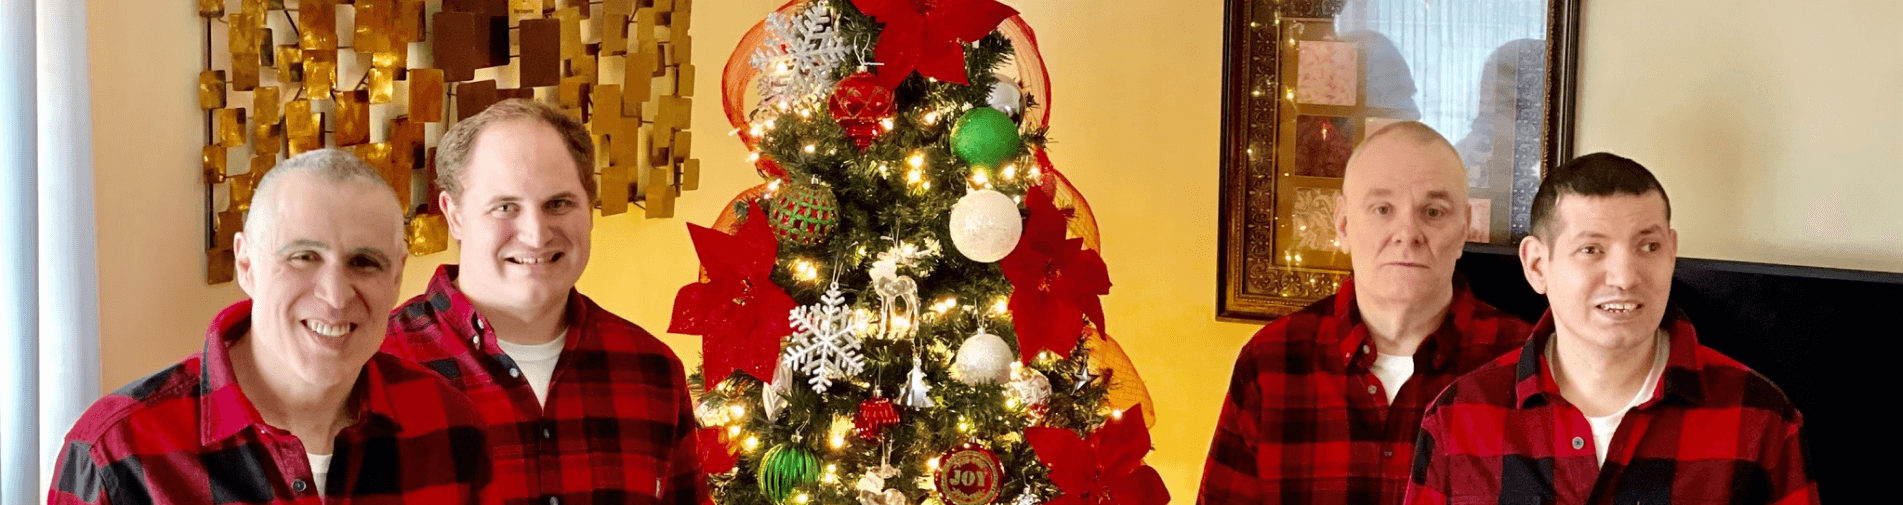 a christmas tree with ornaments and lights